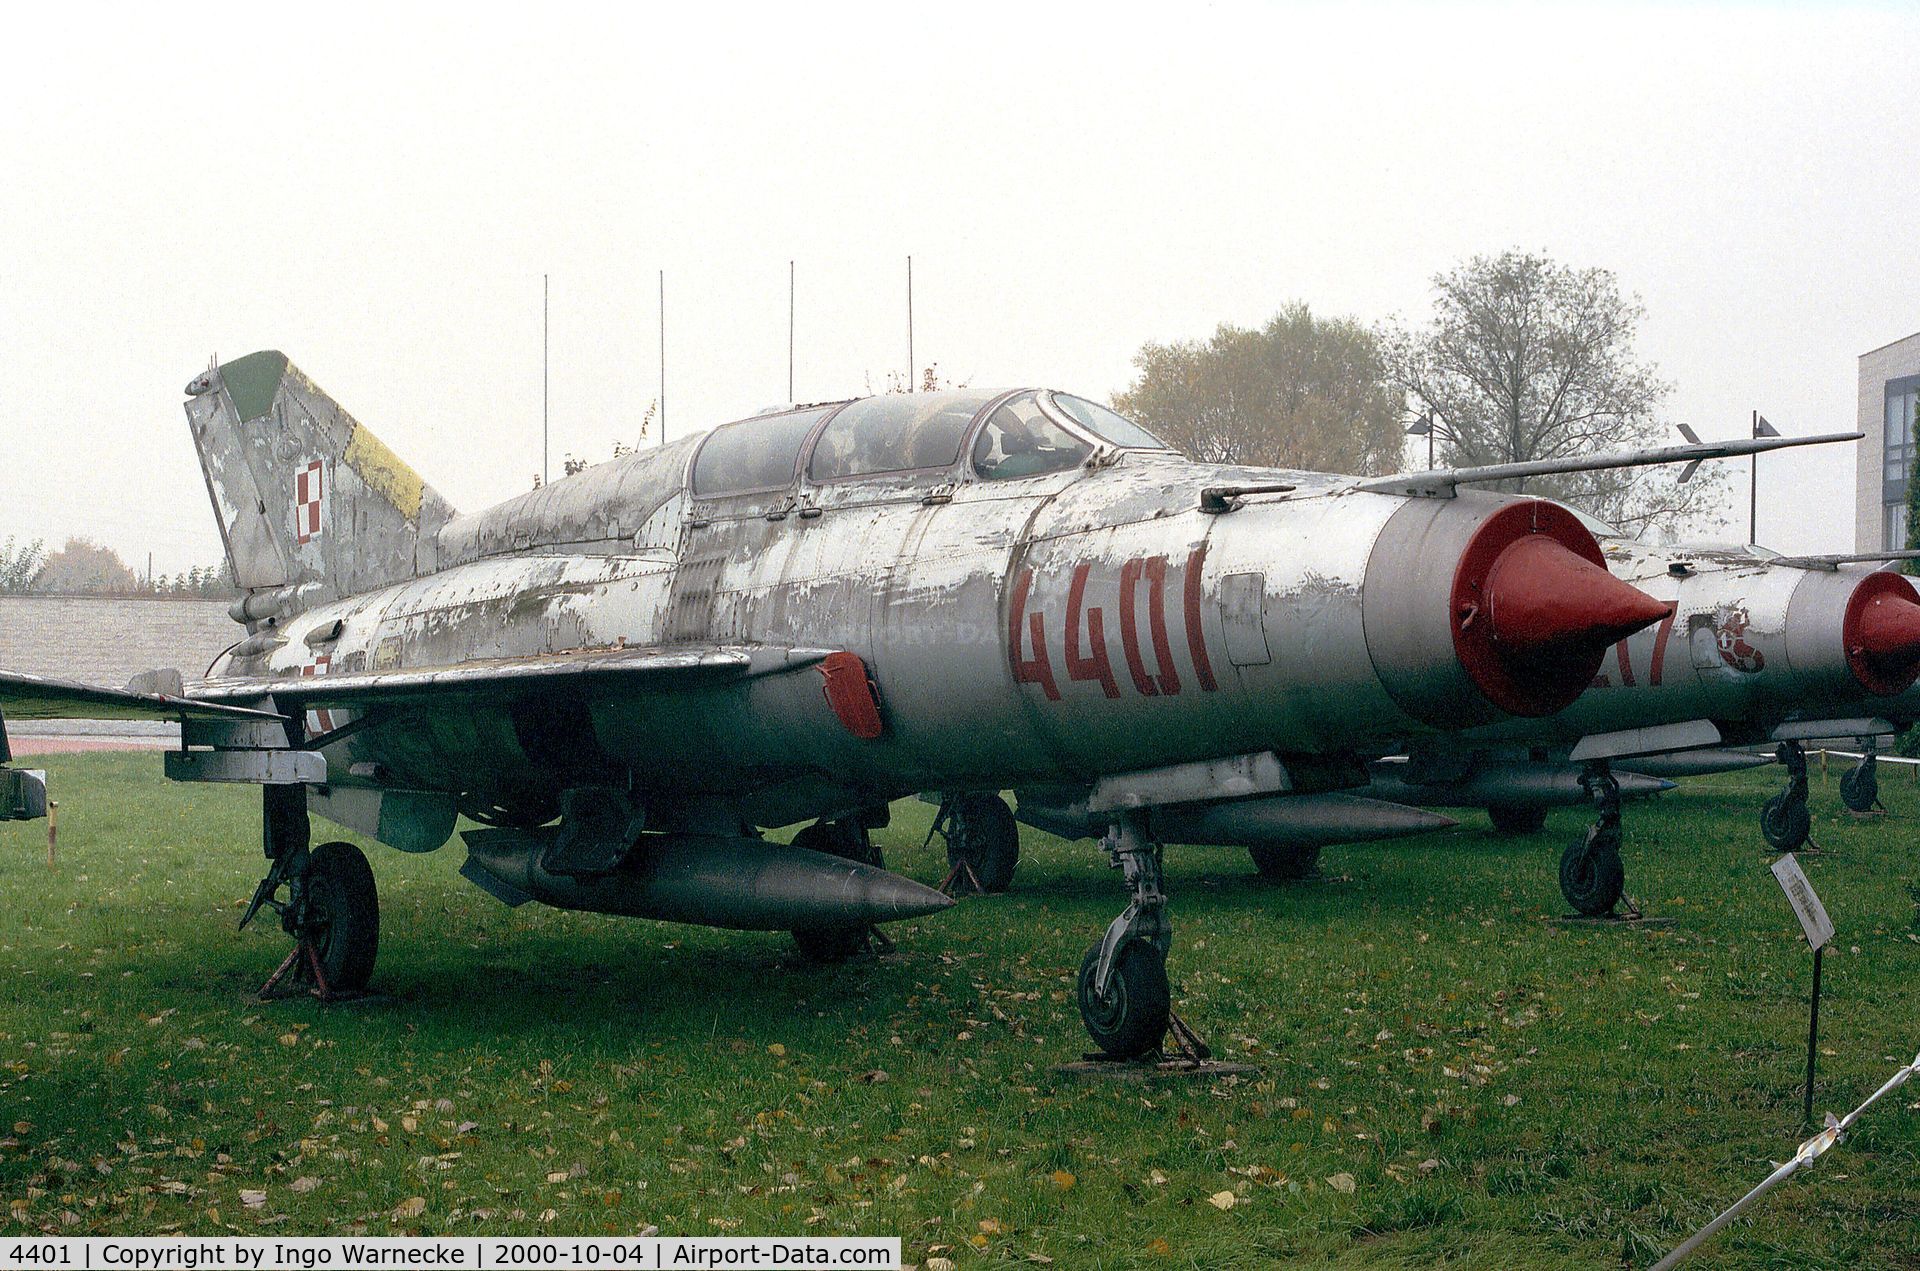 4401, Mikoyan-Gurevich MiG-21US Fishbed C/N 01685144, Mikoyan i Gurevich MiG-21US MONGOL of the polish air force at the Muzeum Lotnictwa i Astronautyki, Krakow